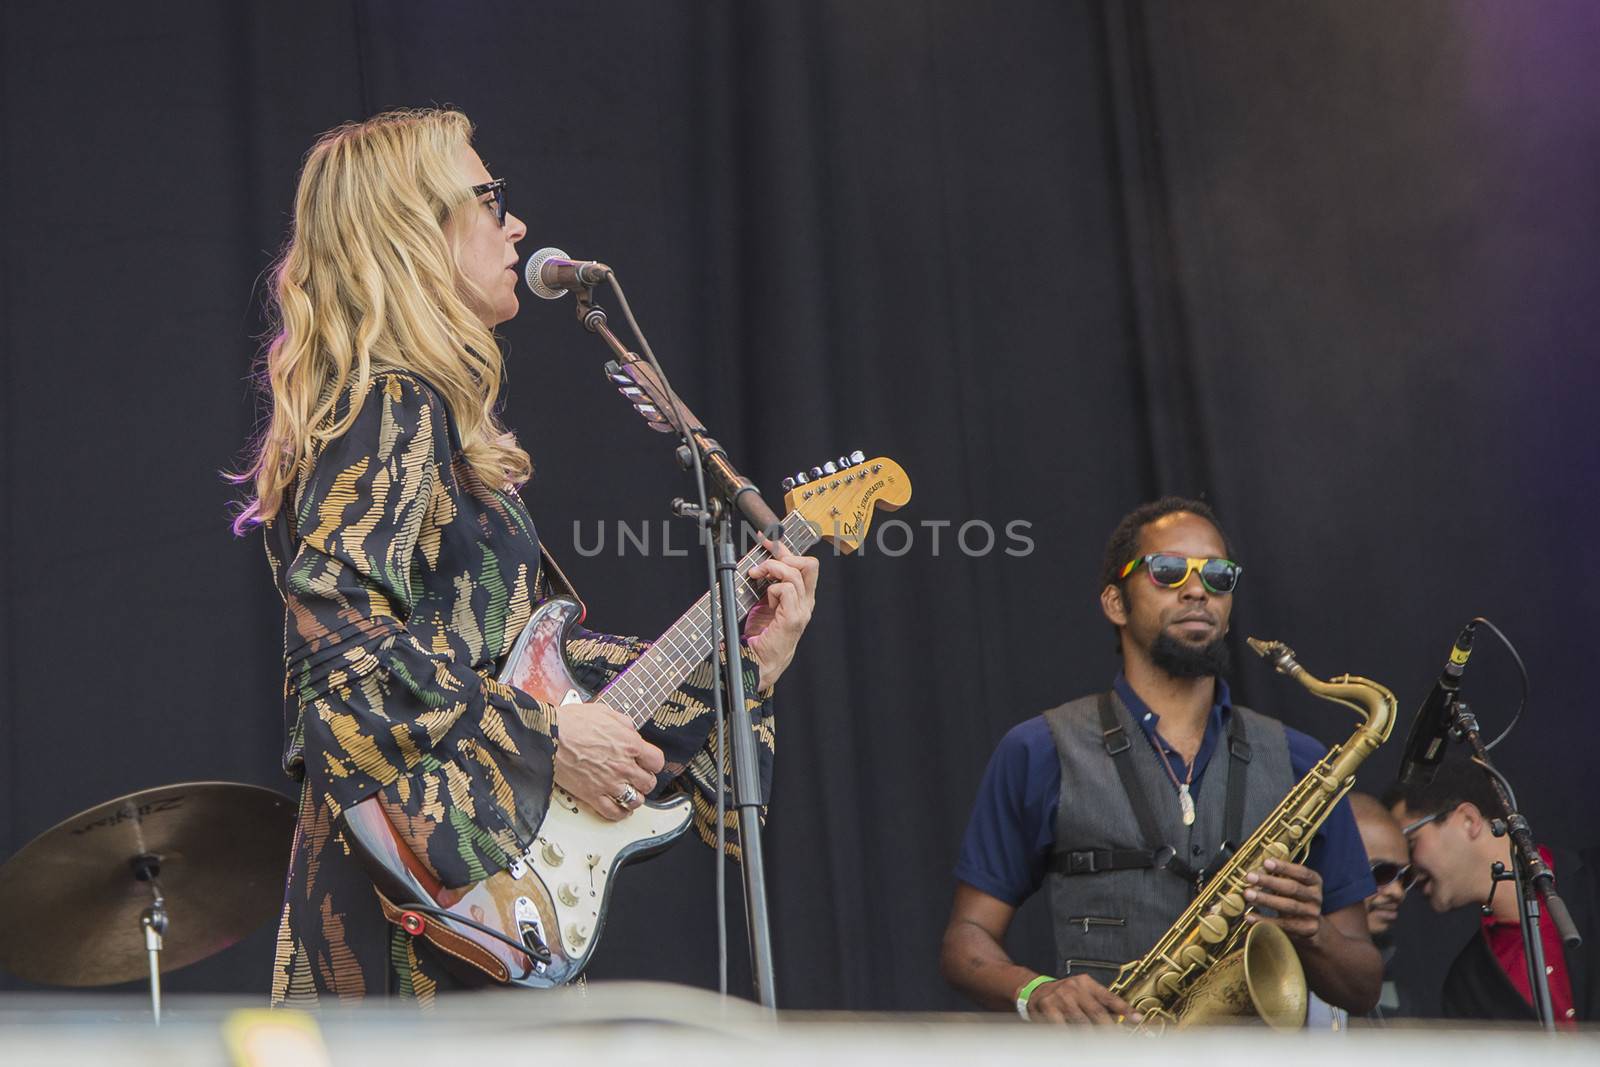 Each year the first week in August held a blues festival in Notodden, Norway. Photo is shot from the concert with Tedeschi Trucks Band. The band members are: Susan Tedeschi ��� lead vocals, rhythm guitar. Derek Trucks ��� lead guitar. Kofi Burbridge ��� keyboards, flute. Tyler Greenwell ��� drums, percussion. J. J. Johnson ��� drums, percussion. Kebbi Williams ��� saxophone. Maurice Brown ��� trumpet. Saunders Sermons ��� trombone. Mike Mattison ��� harmony vocals. Mark Rivers ��� harmony vocals.